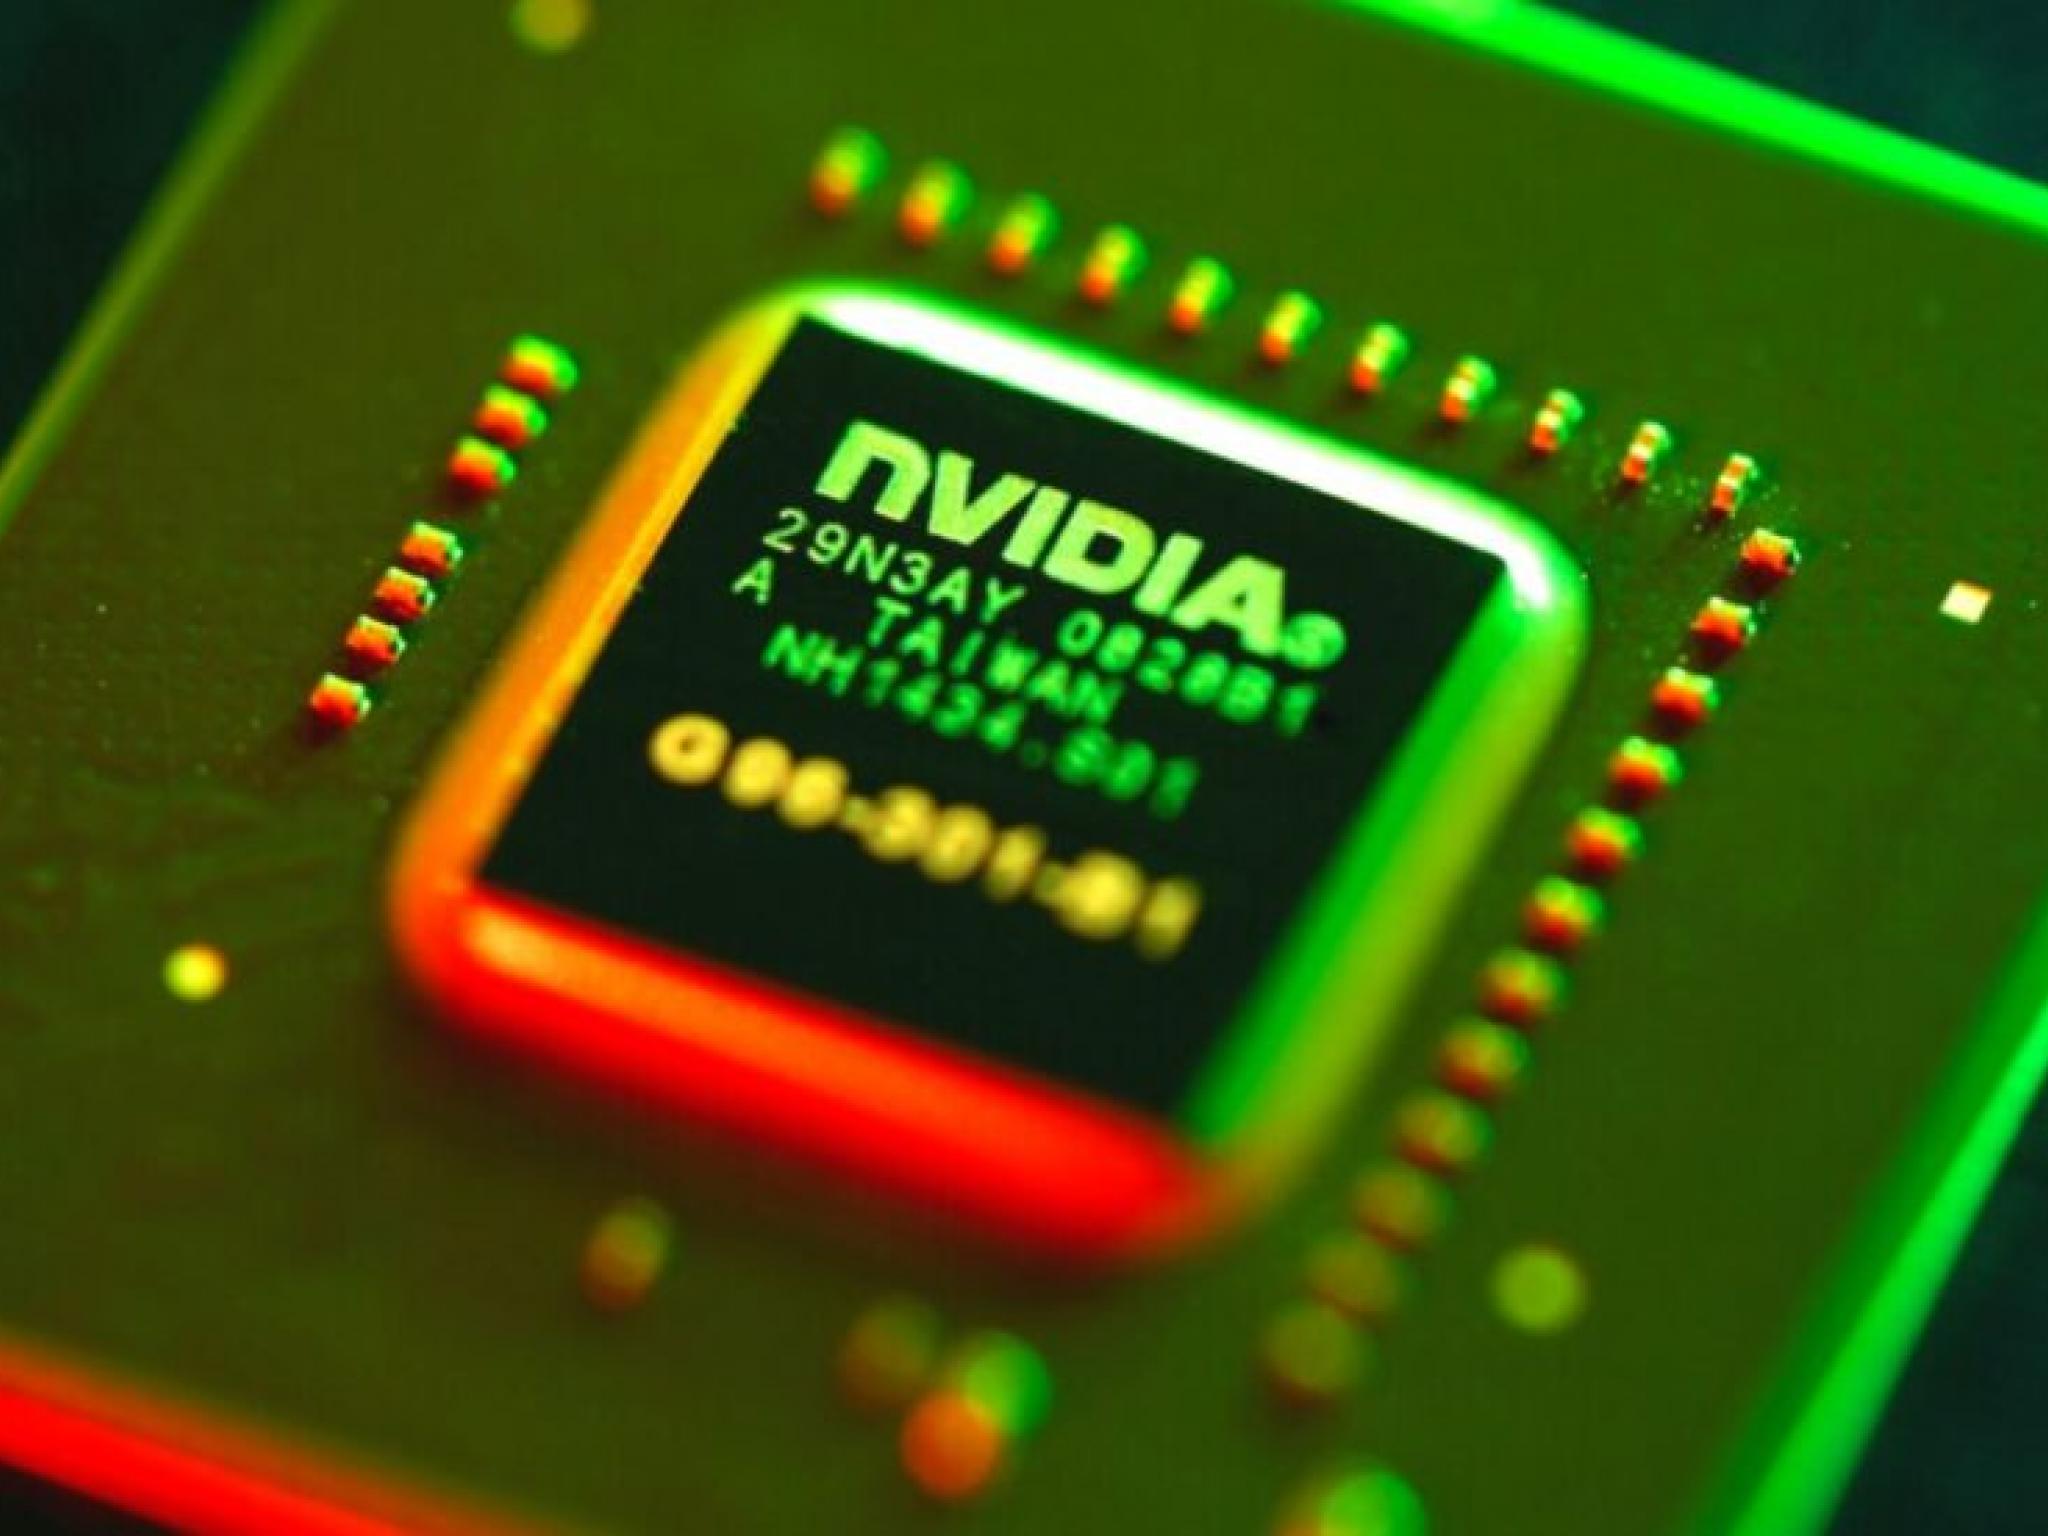  nvidias-blackwell-gpus-spark-analyst-excitement-predicted-to-drive-next-wave-of-ai-innovation 